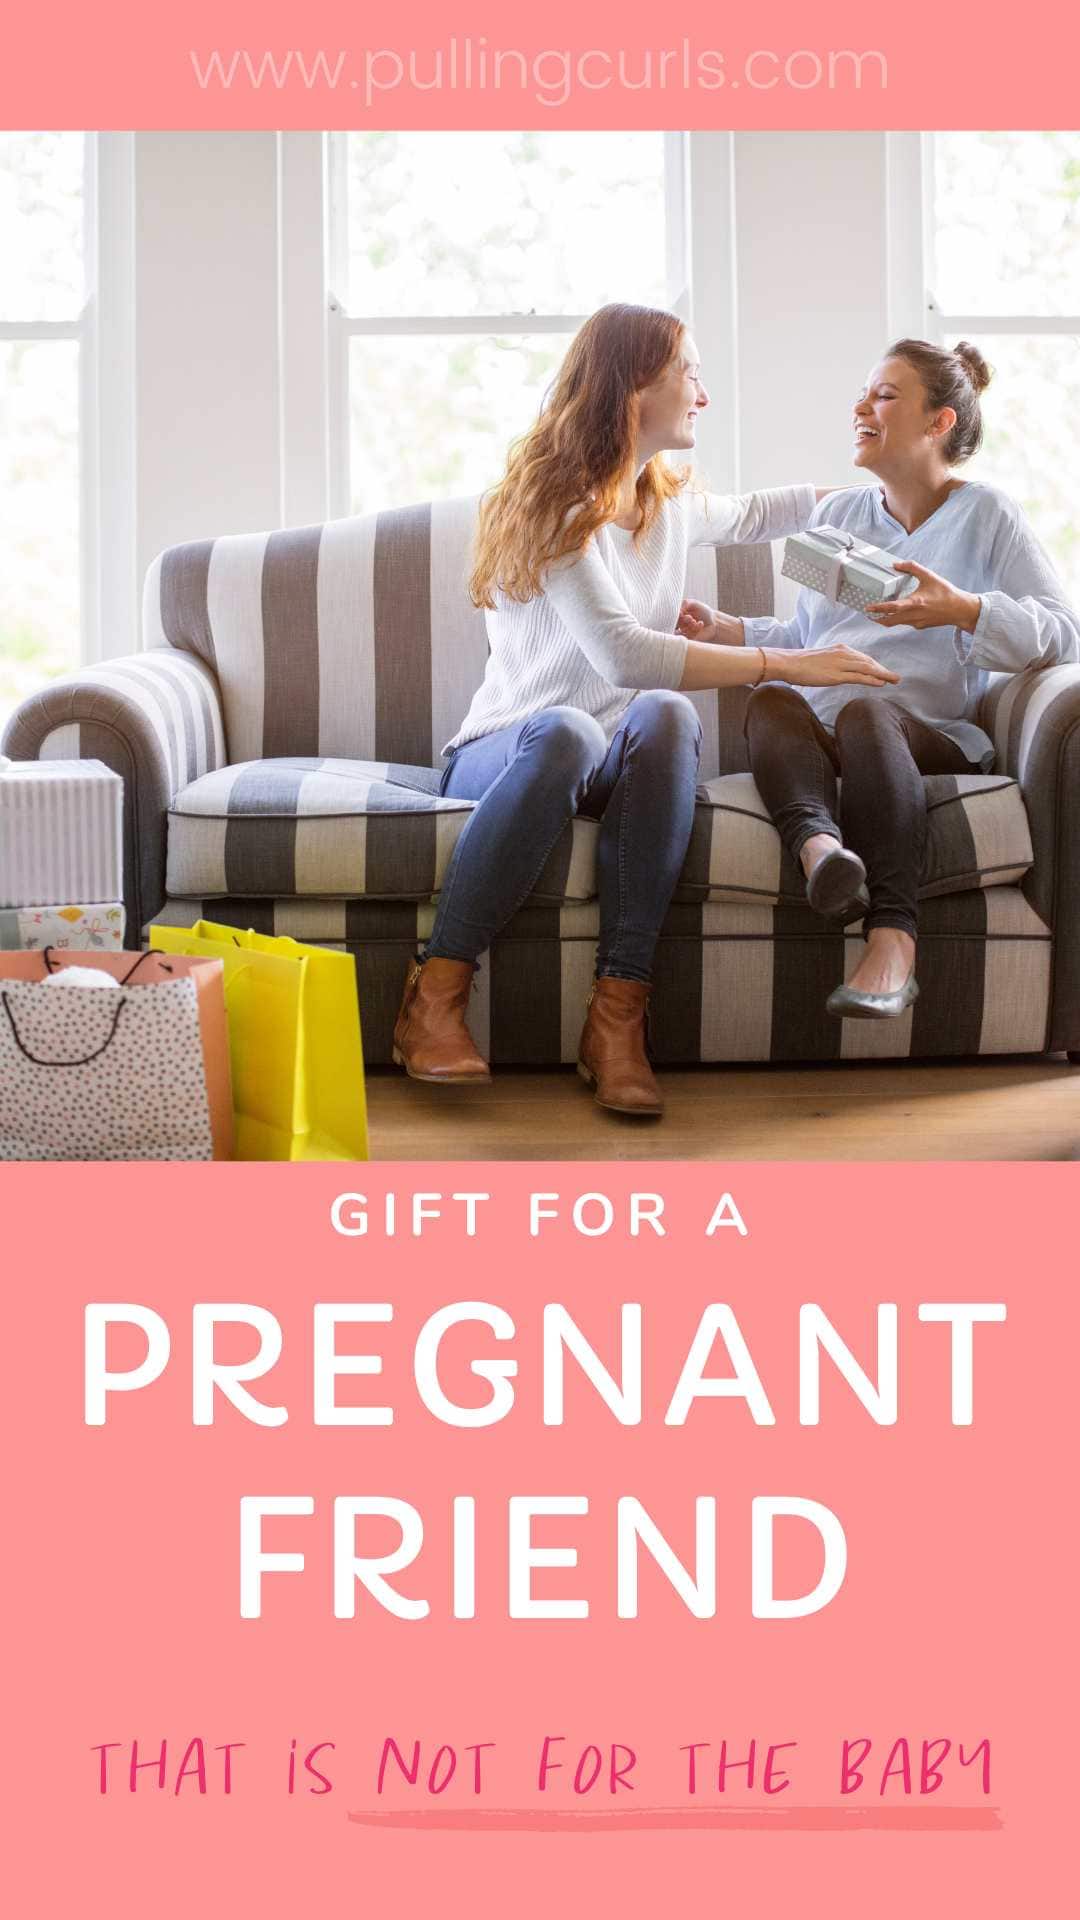 Surprise your pregnant friend with something special that’s not just for the baby! Give them a spa day, a cozy new sweater, or a subscription to an online yoga class - it’s the perfect way to show them some extra love during this special time. via @pullingcurls